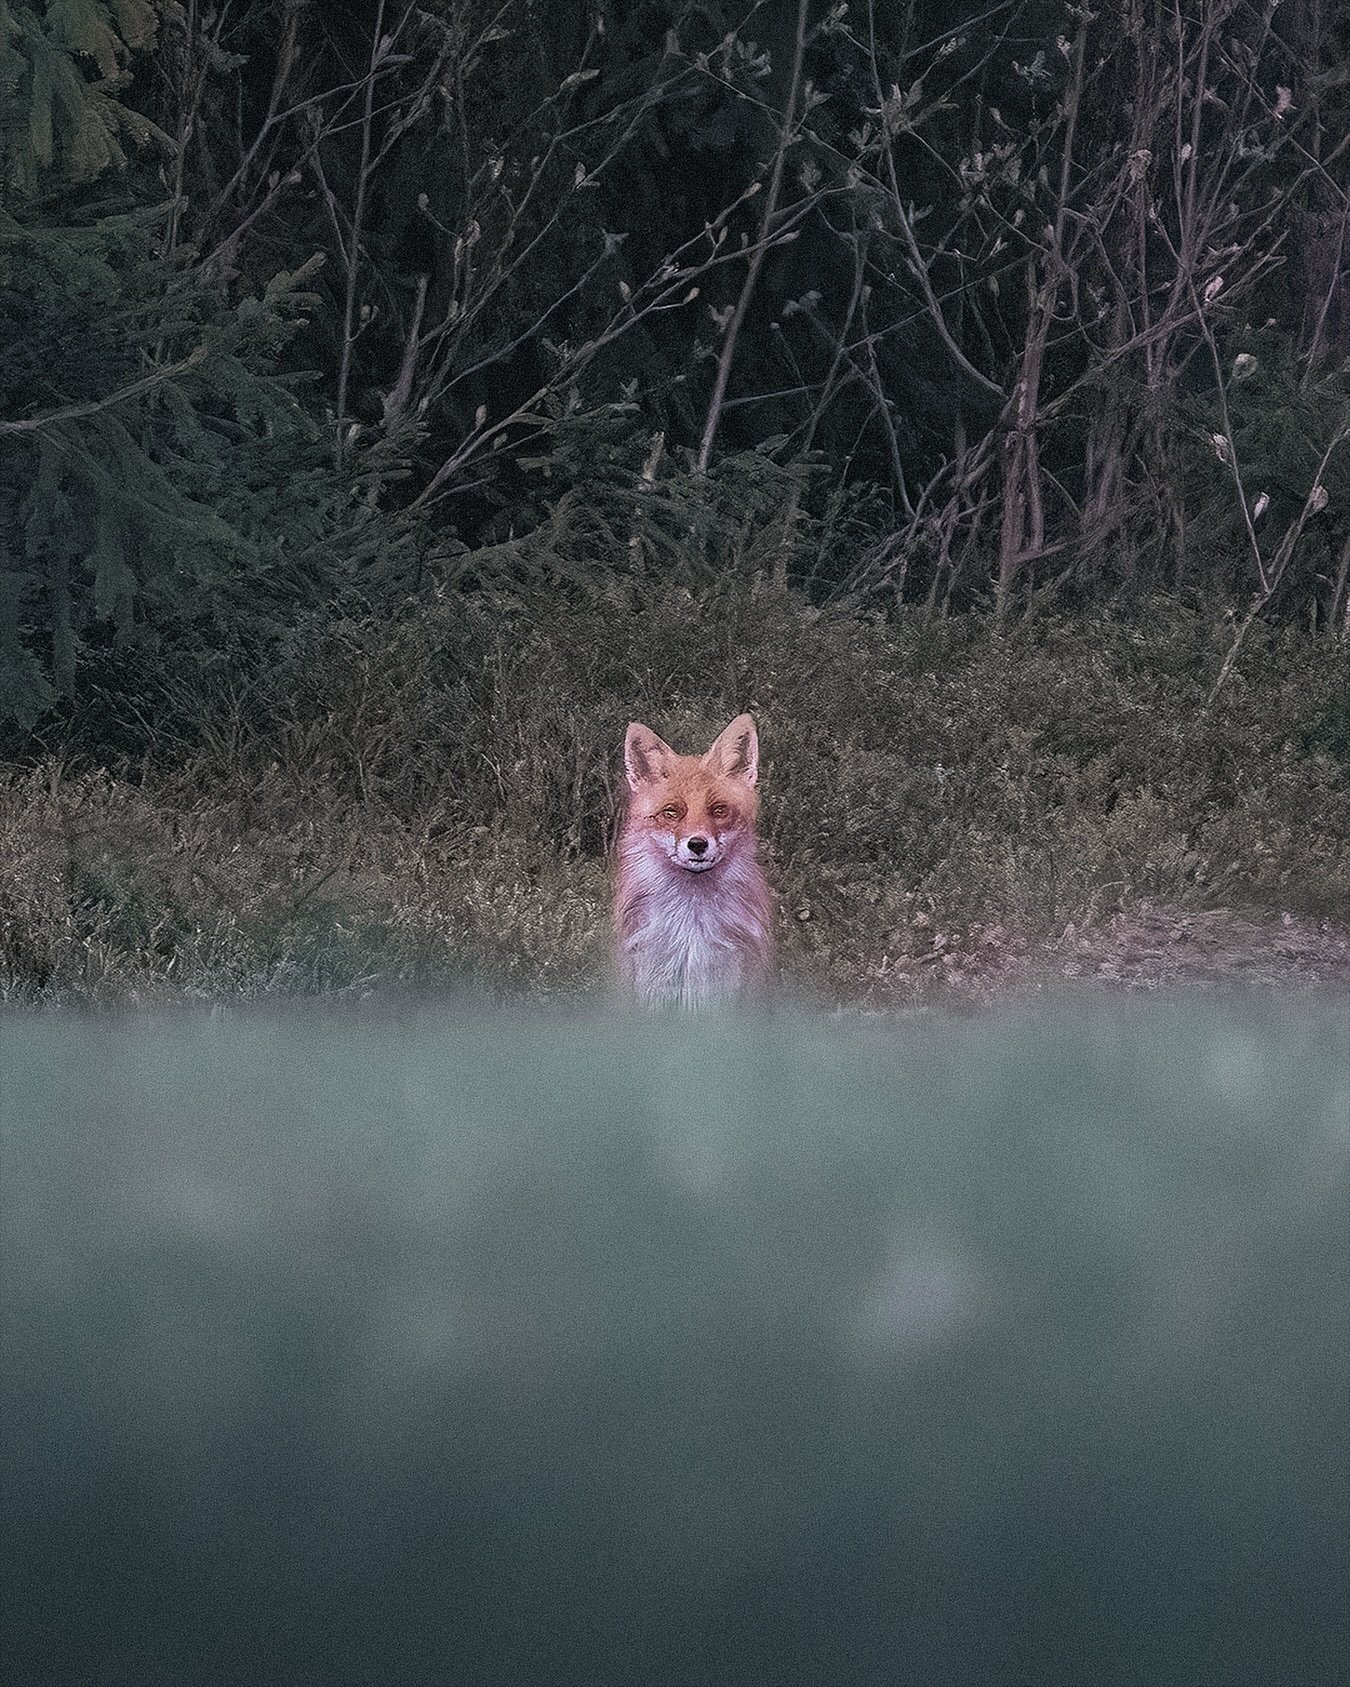 Long time no see. One of my work projects has been quite intense, and there has been no time for photography. It&rsquo;s about to change soon. Yesterday, I went photographing for the first time in two months. Saw this fox from a long distance! But he